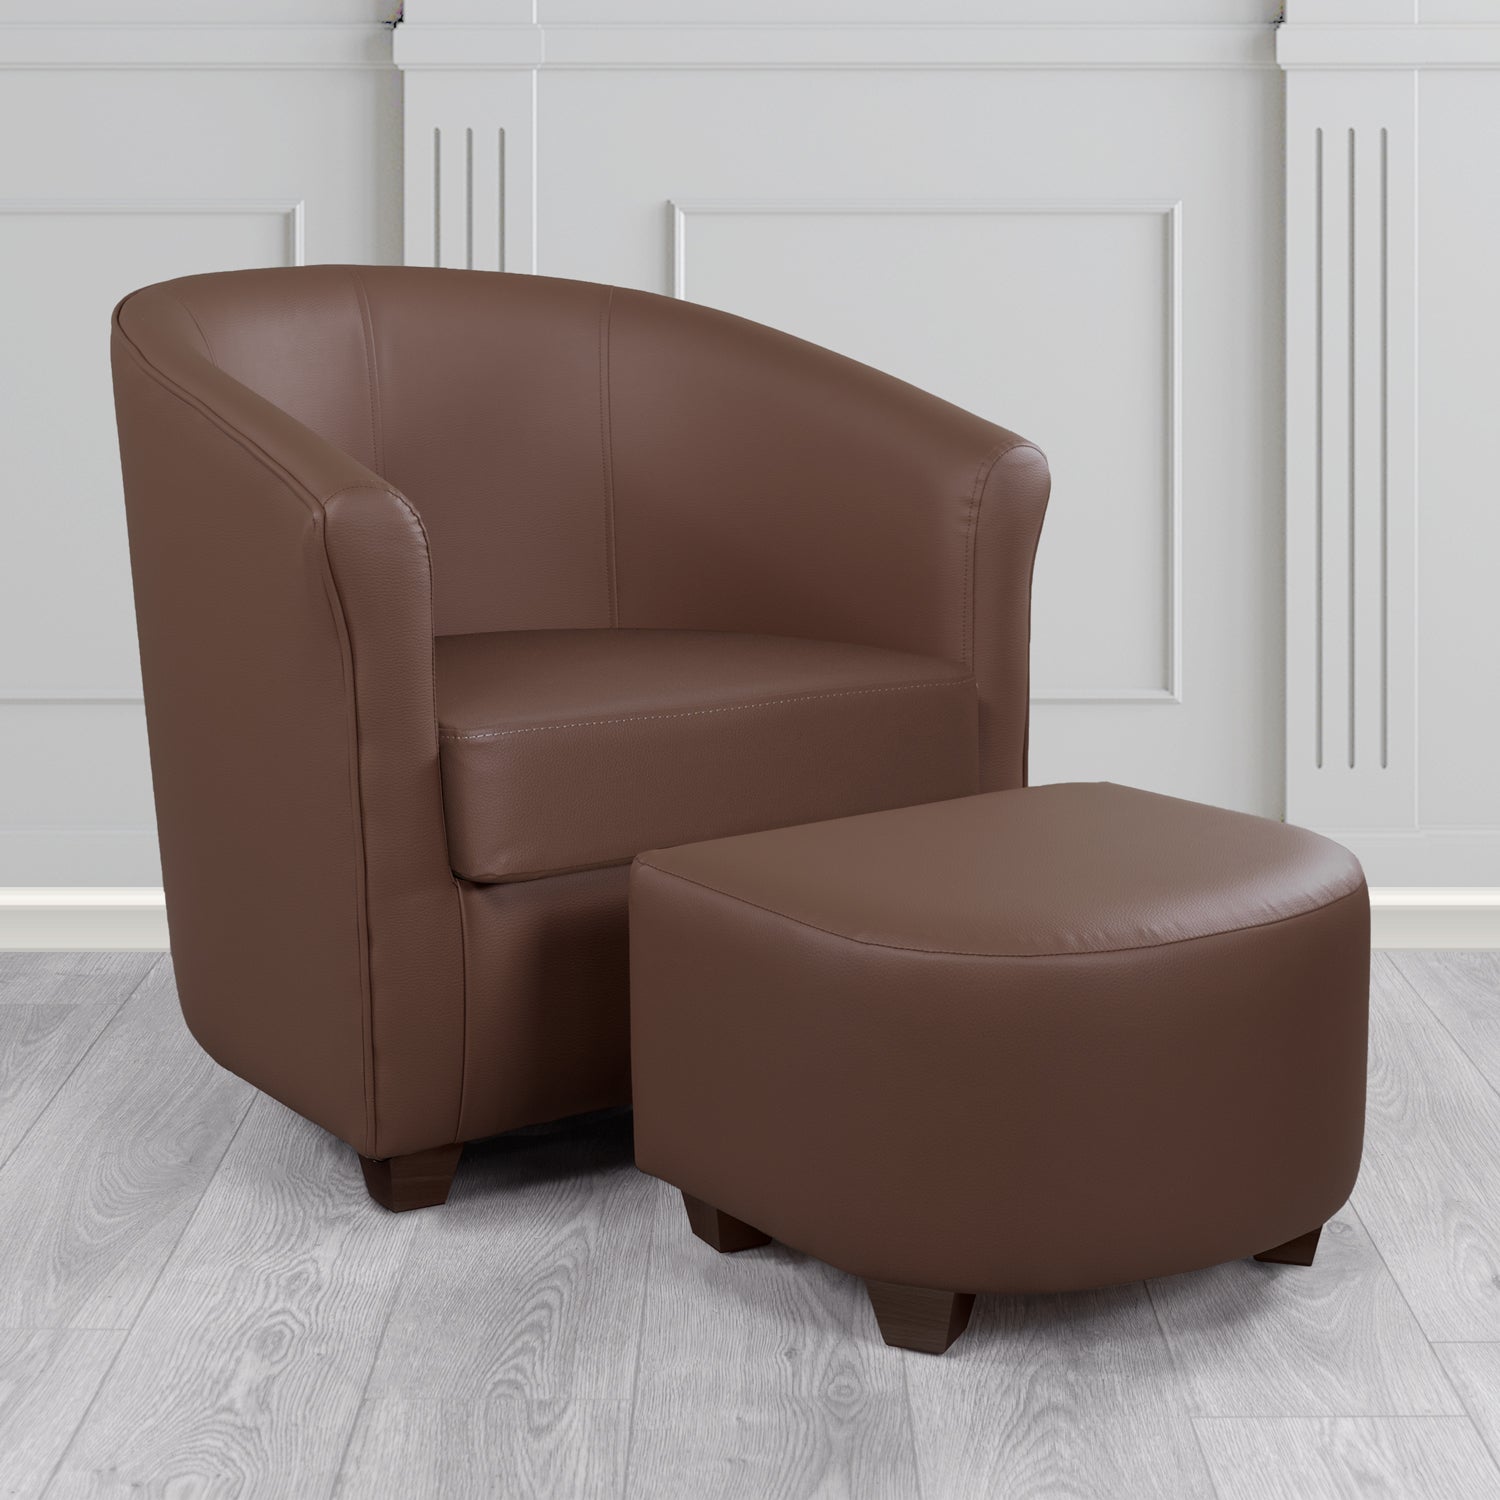 Cannes Tub Chair with Footstool Set in Just Colour Cocoa Crib 5 Faux Leather - The Tub Chair Shop